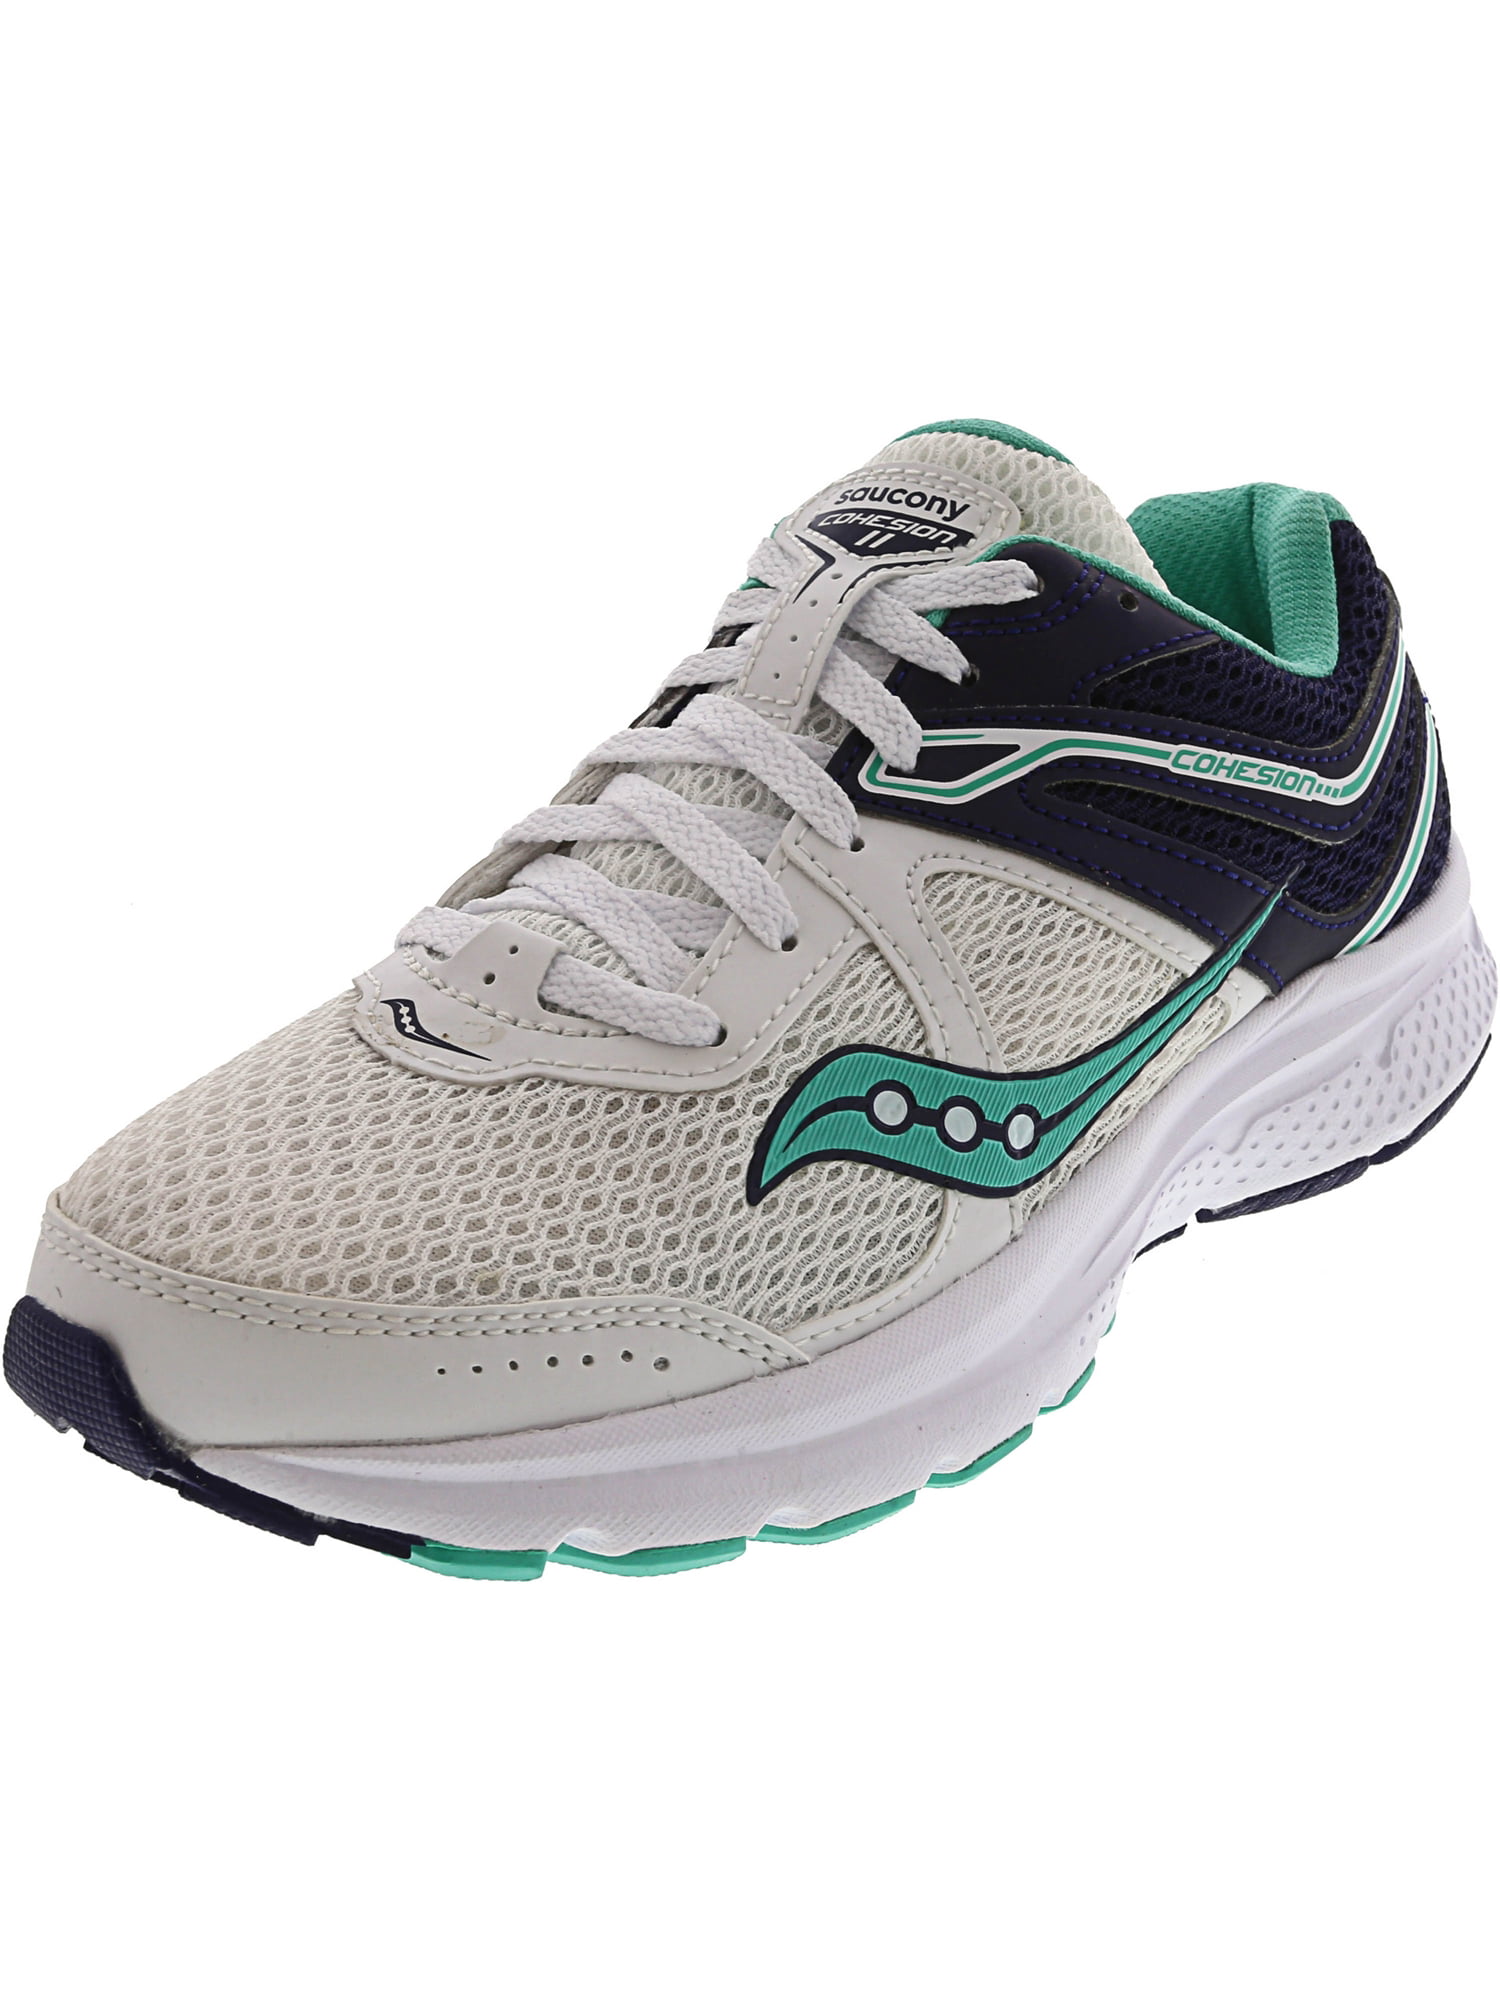 saucony women's cohesion running shoes